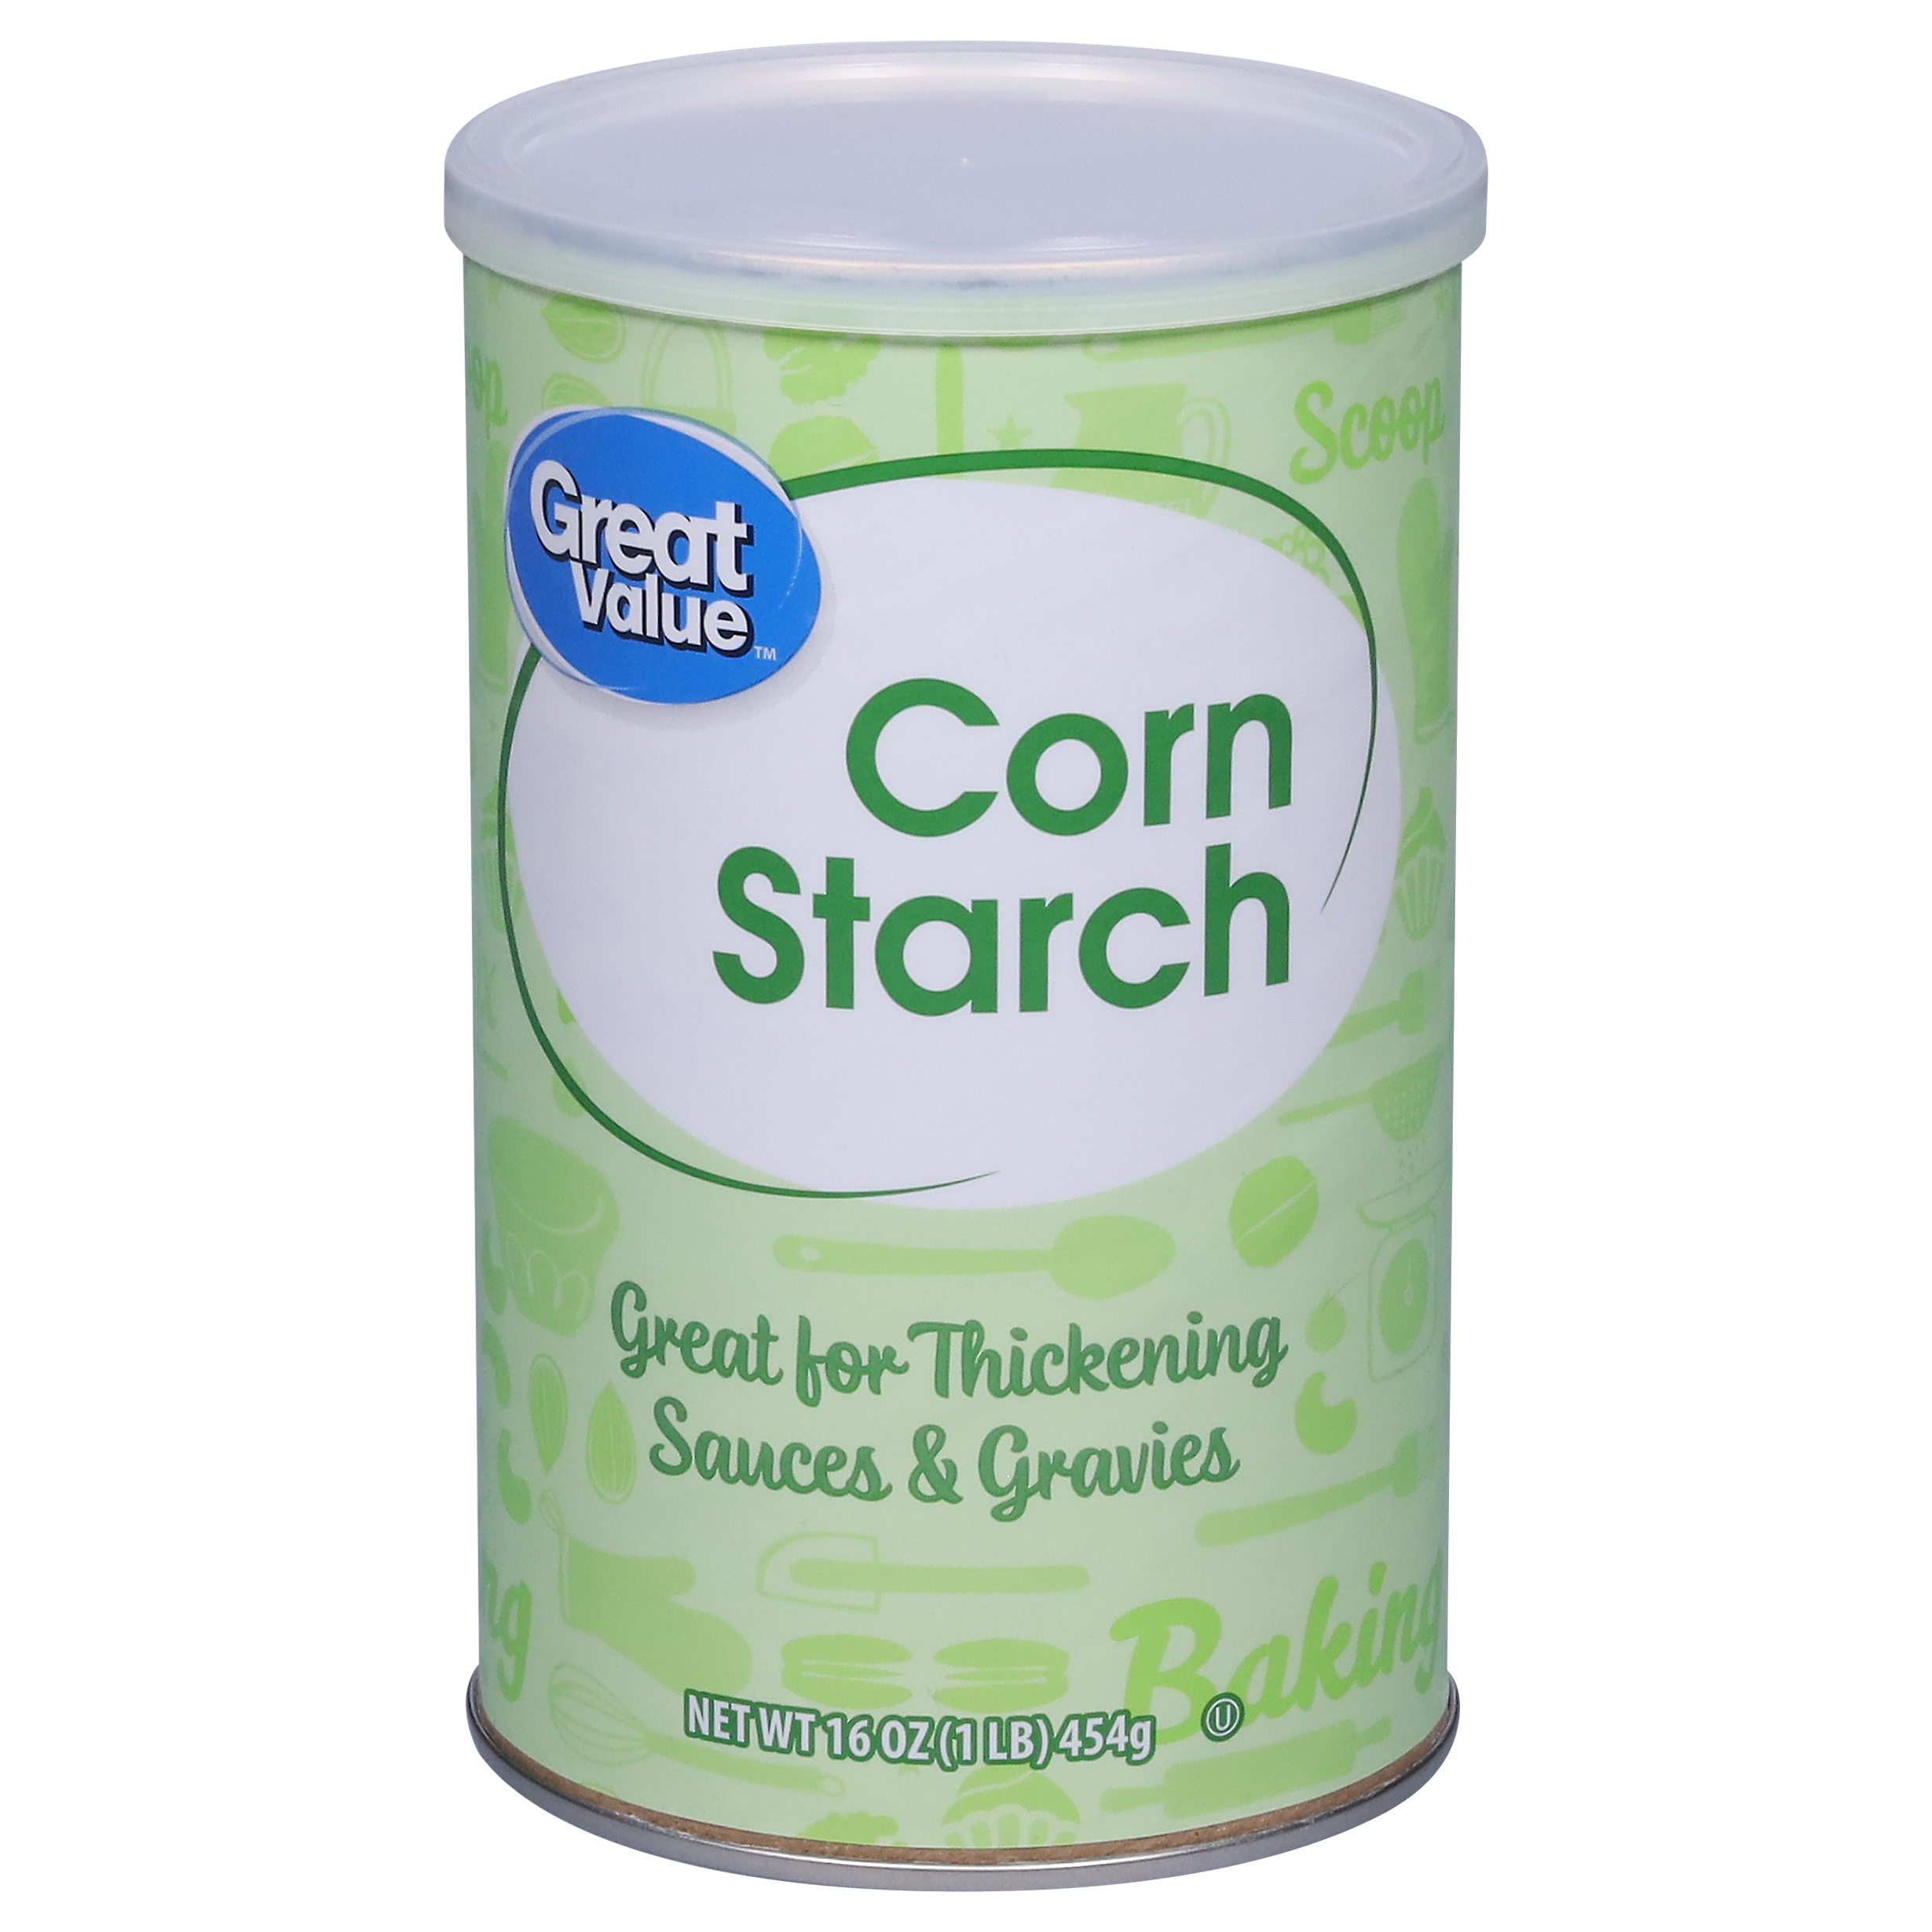 Great Value Corn Starch, 16 oz - image 1 of 8